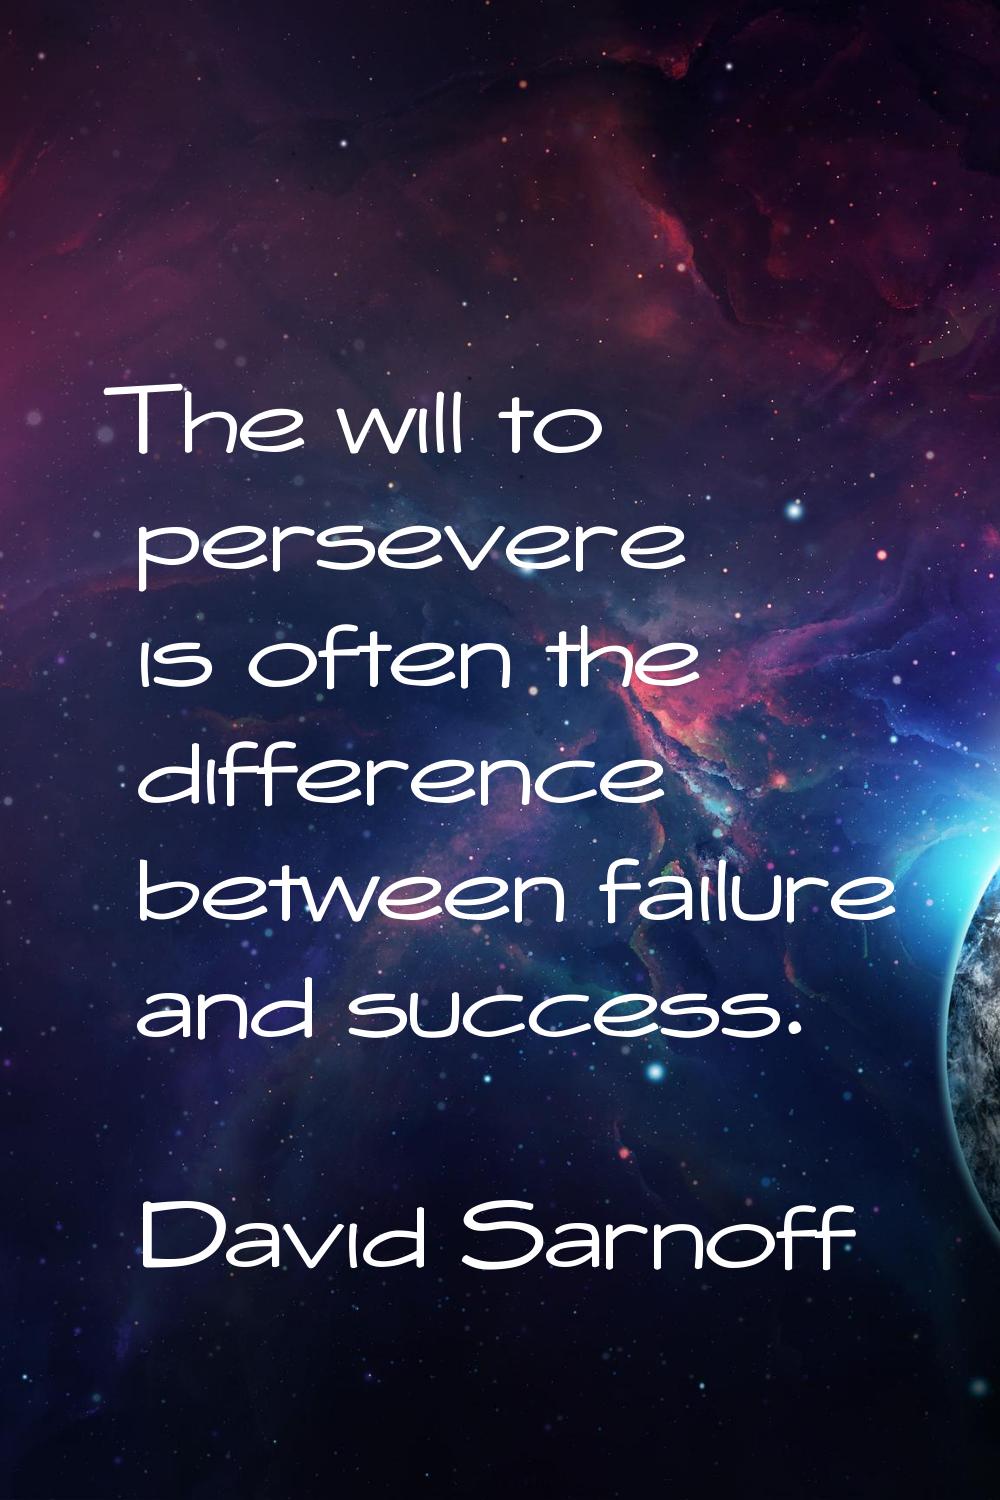 The will to persevere is often the difference between failure and success.